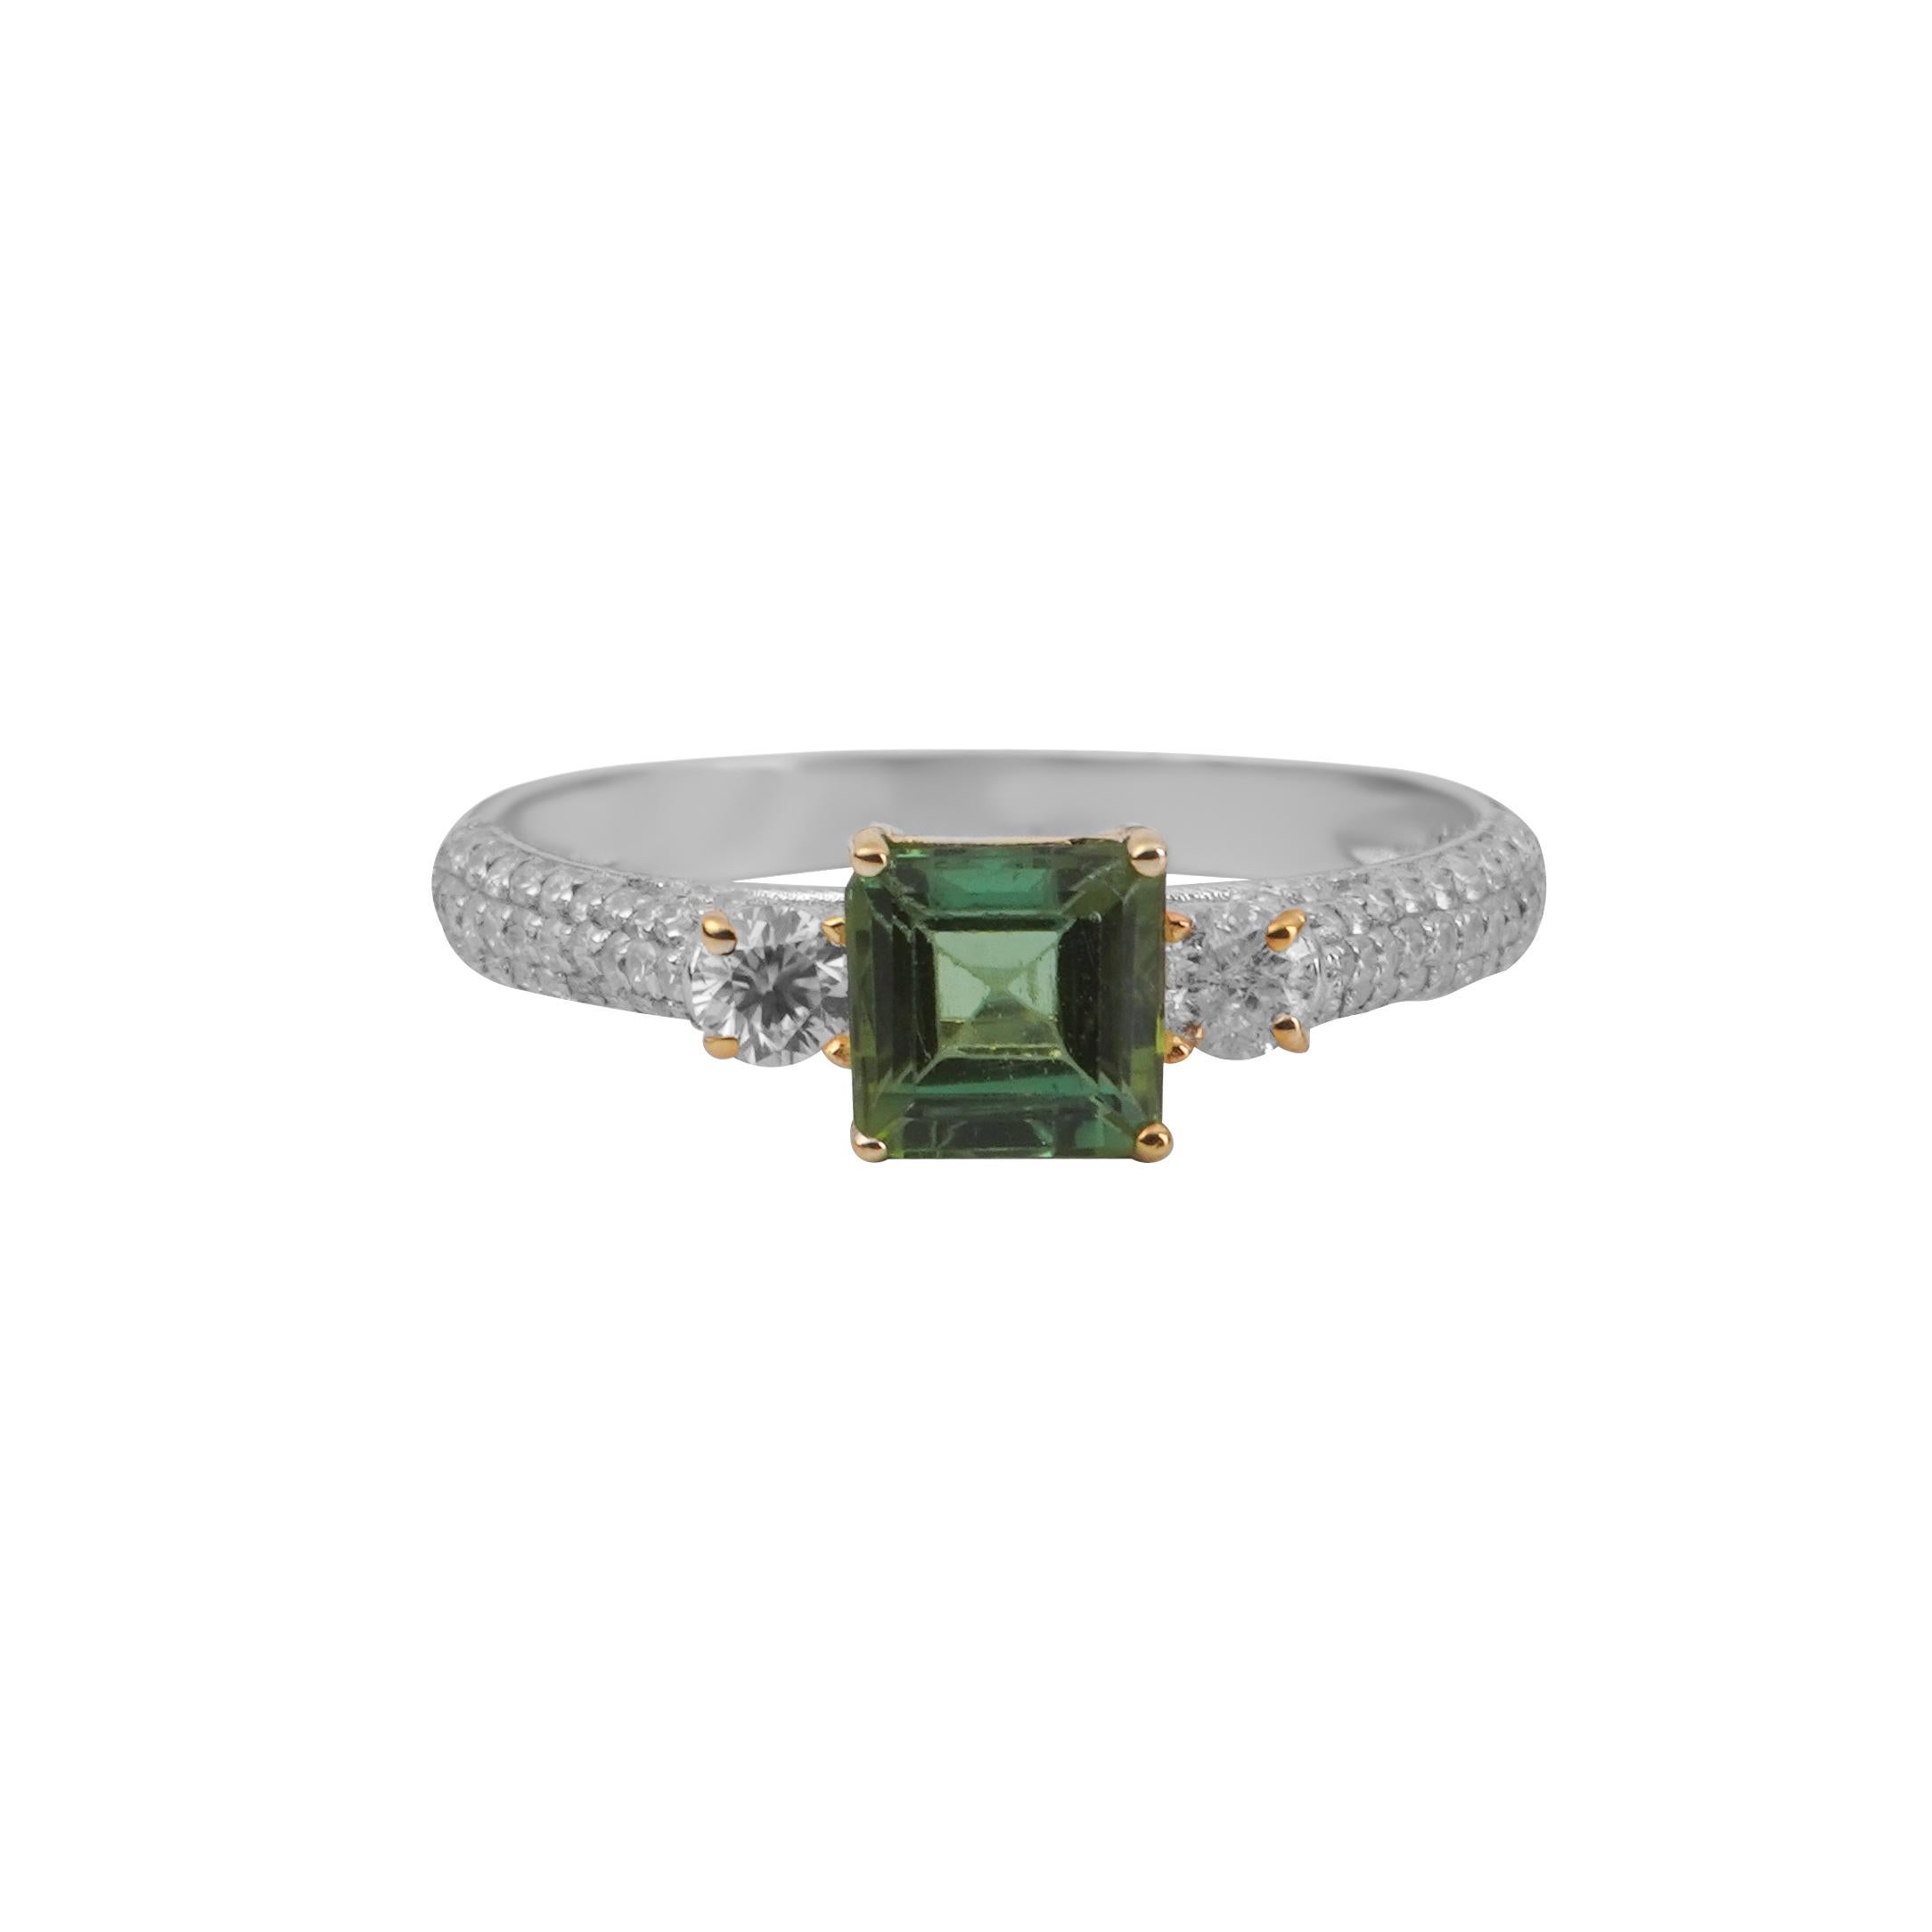 PRODUCT DETAILS:
18k Solid Gold
Stones:
Center Stone: Natural loose tourmaline 1 c.t (approx)
Side stones :Brilliant cut Moissanite 0.5 c.t (approx)

Are you looking for a stunning ring that will make you feel like a star? Look no further than the